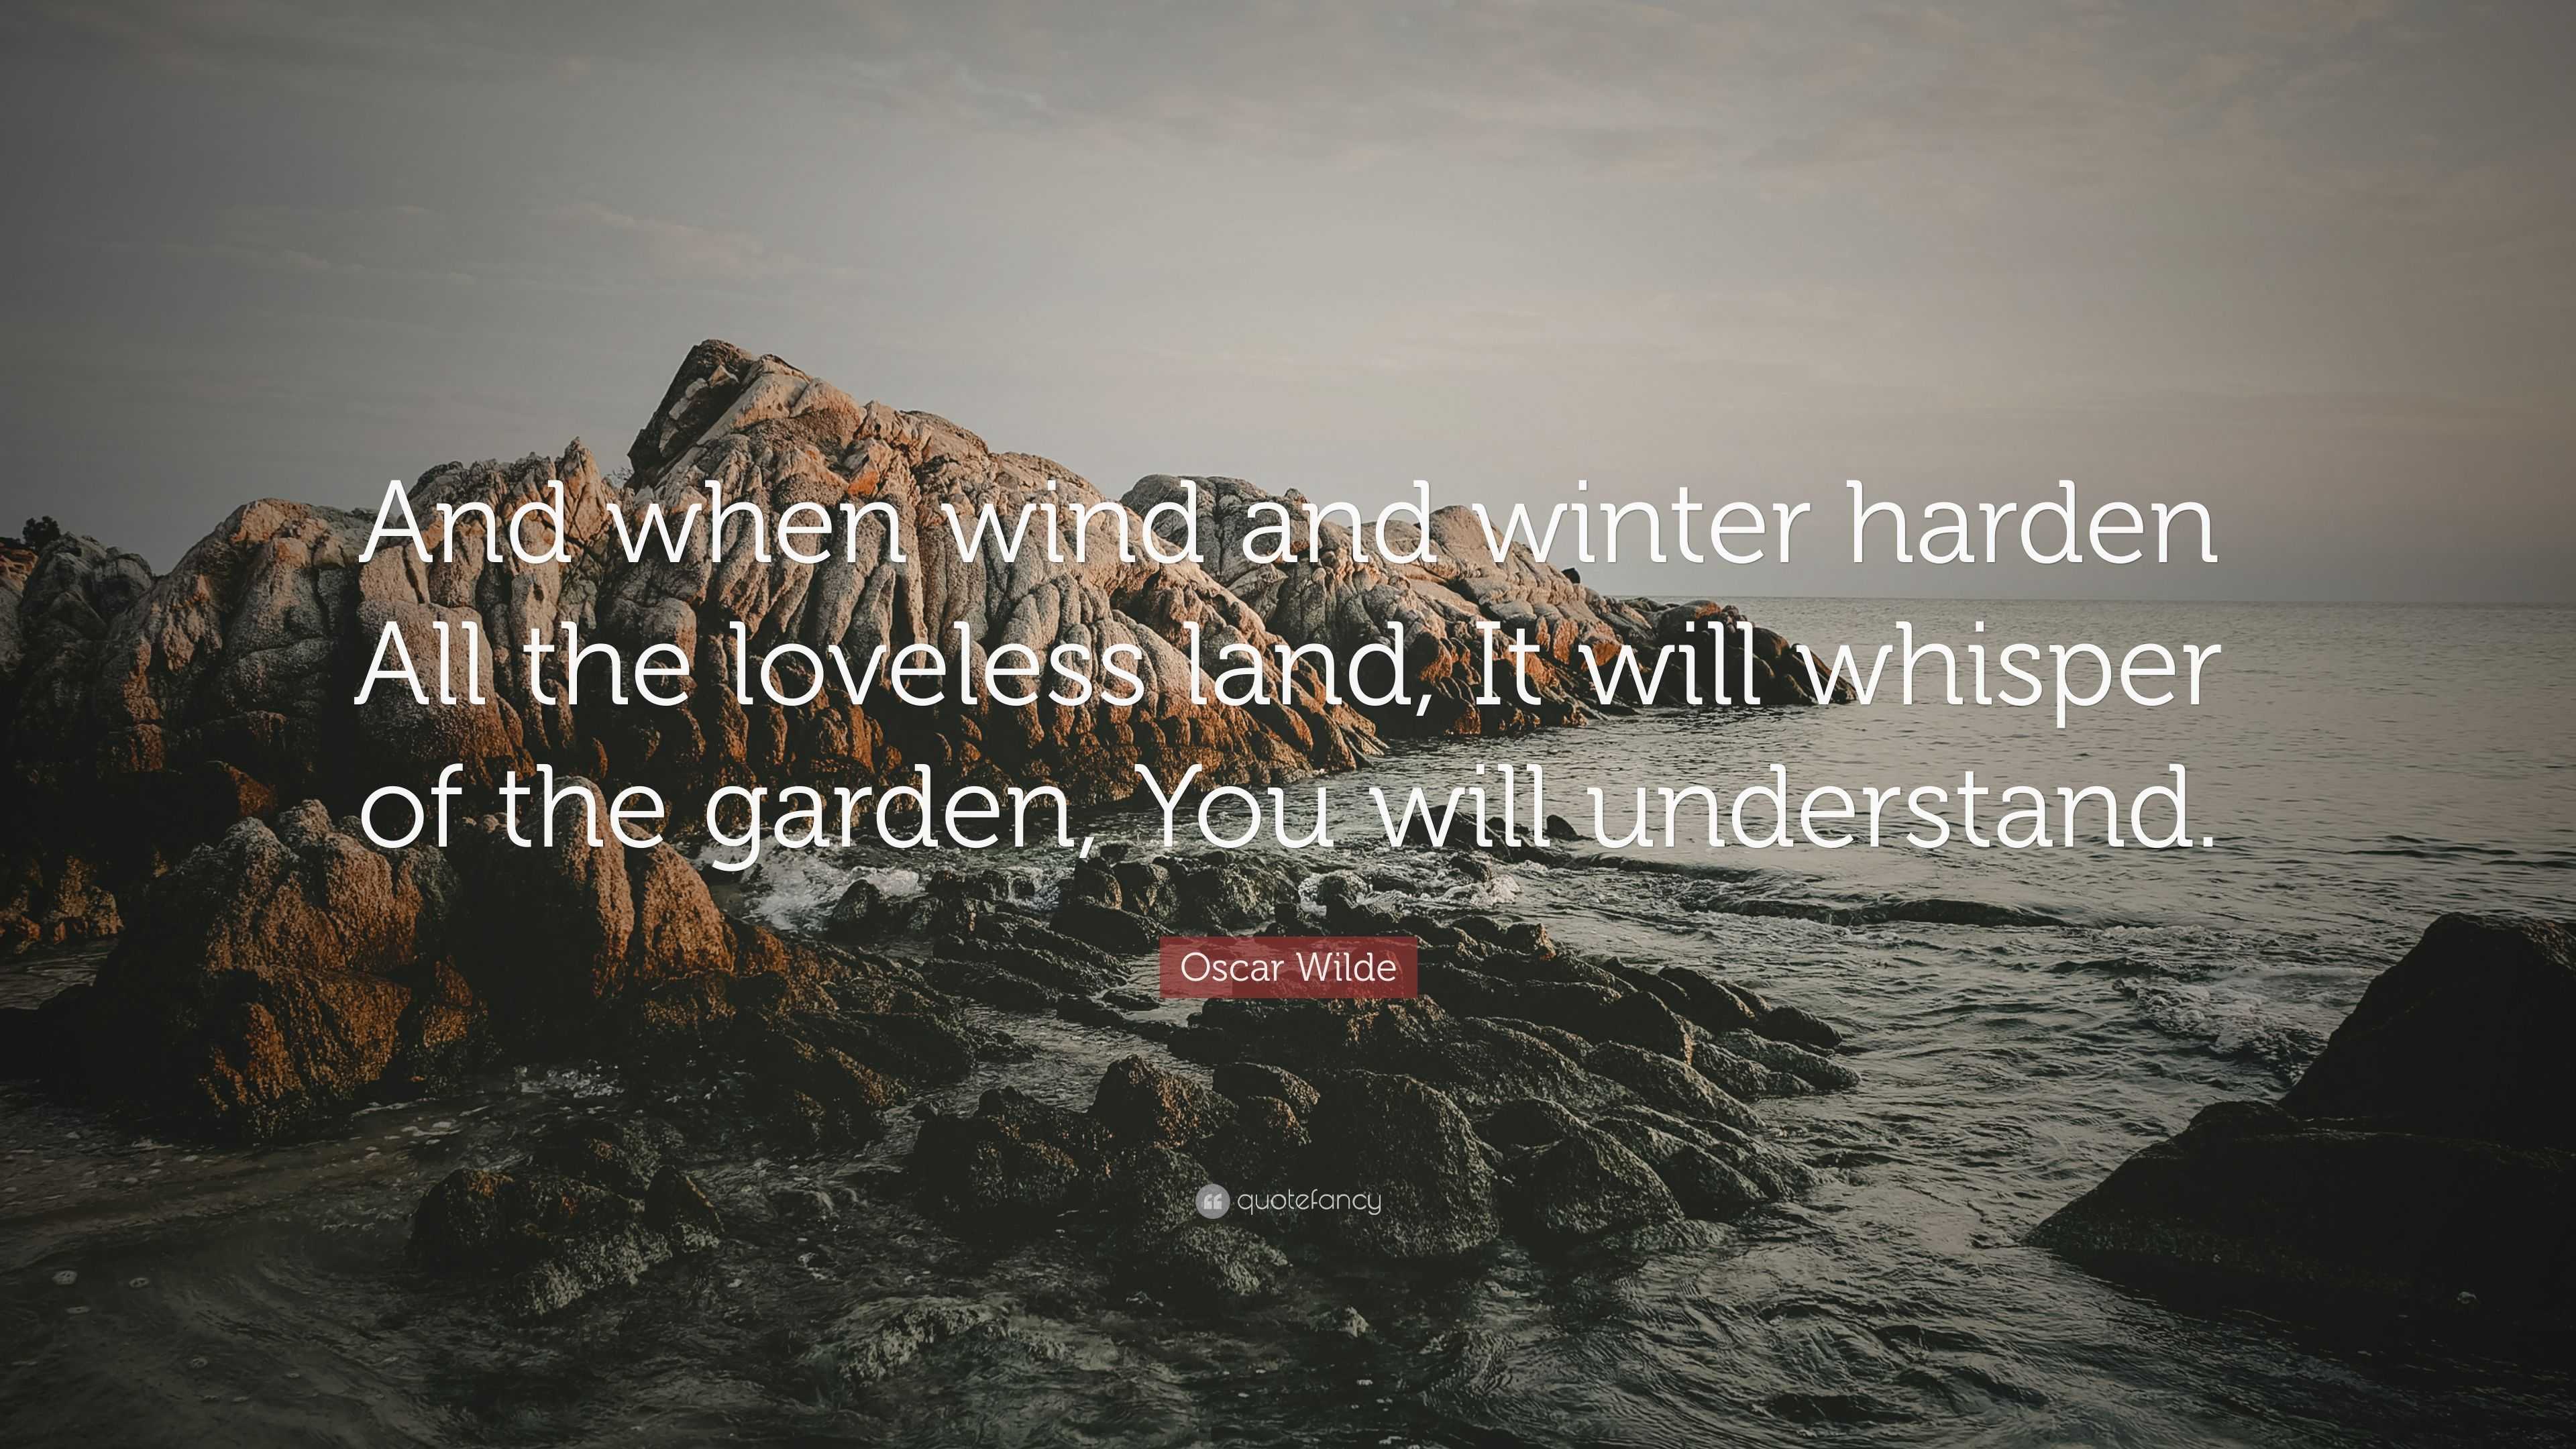 Oscar Wilde Quote “And when wind and winter harden All the loveless